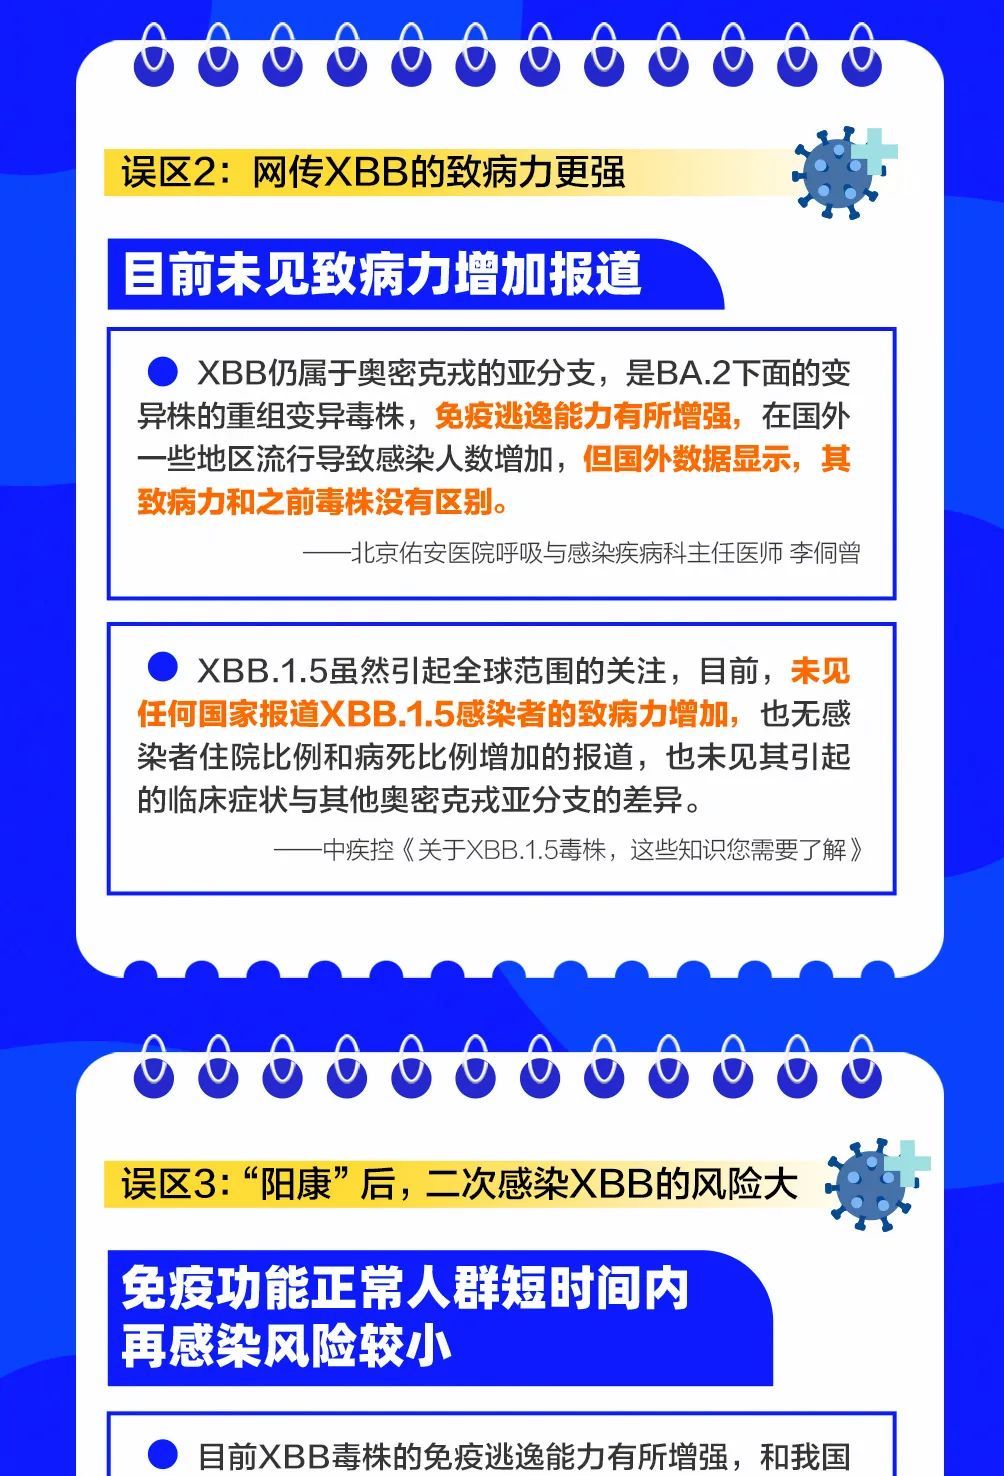 The latest national investment competitiveness is released!The top 6 of Guangdong accounts for 5 seats, the top of Futian, Shenzhen